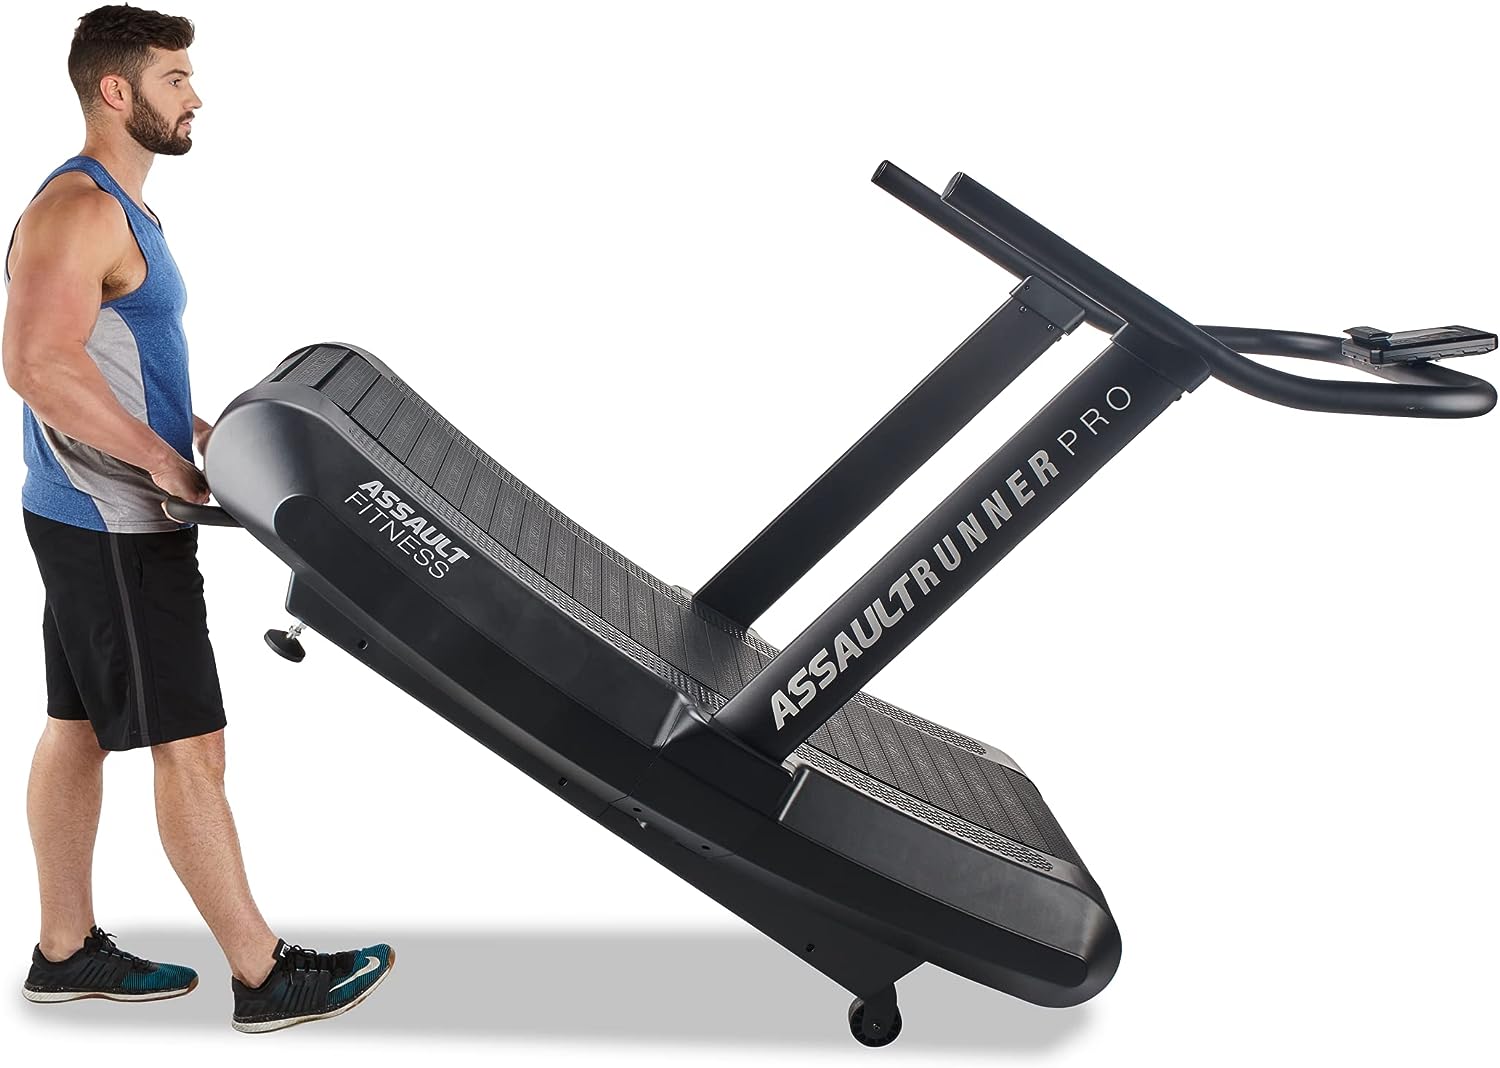 Assault Fitness Runner Pro - Better Than a Motorized Treadmill - Great for HIIT, Cardio, and Endurance Training - Motorless